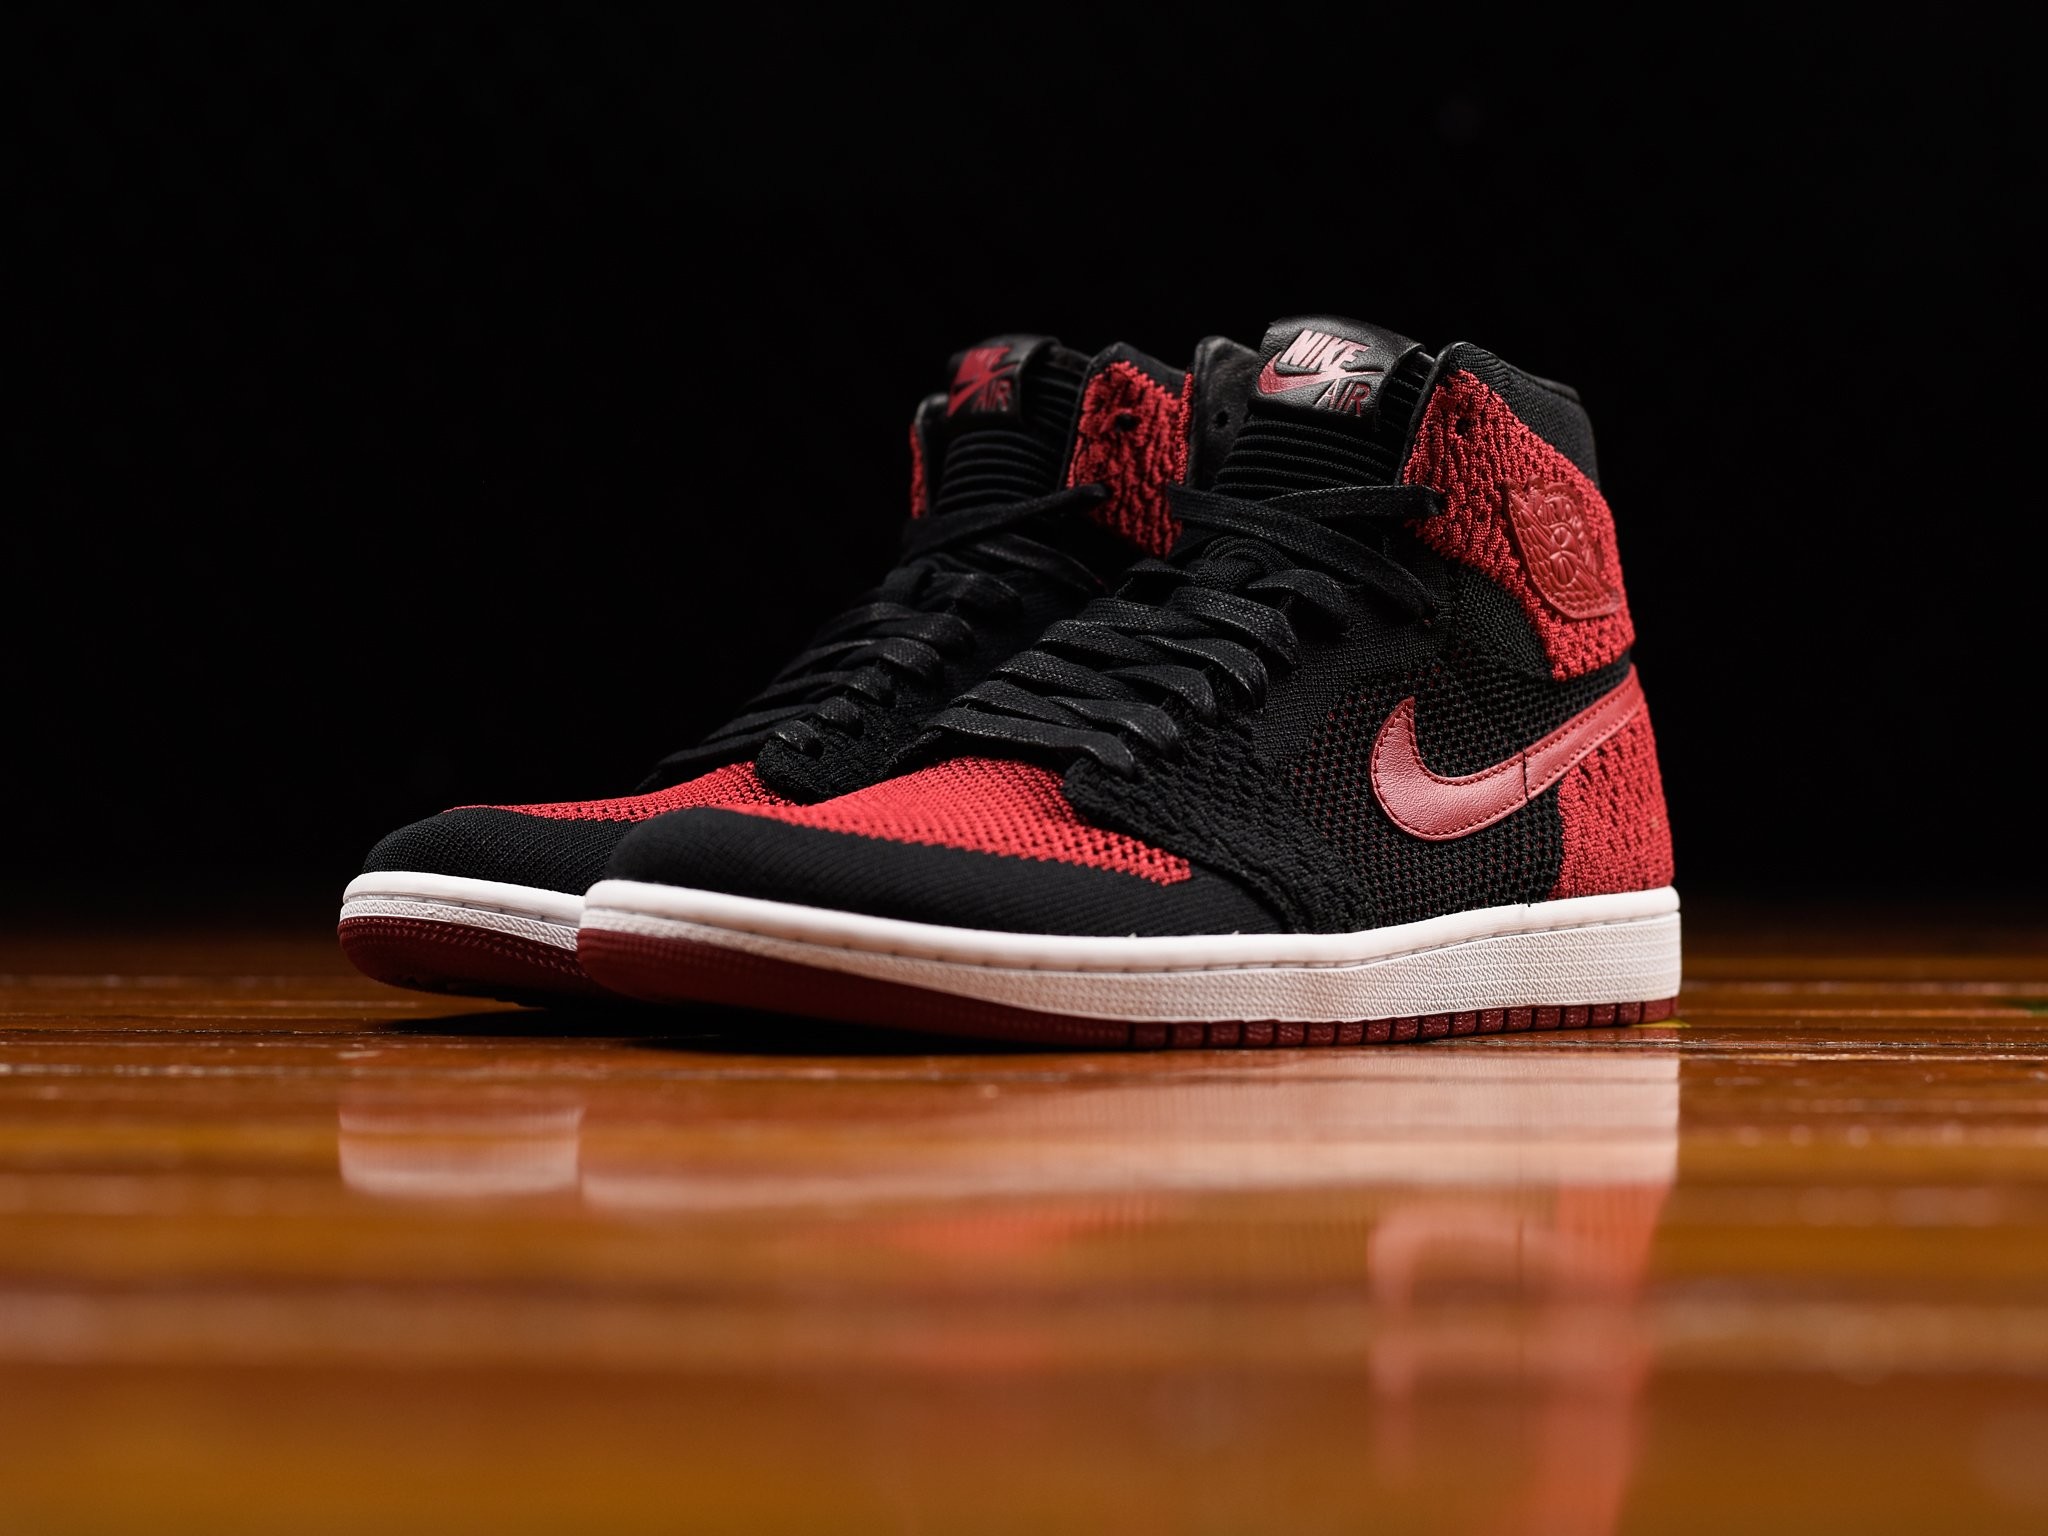 2048x1536 The Air Jordan 1 is about to embark on a new chapter of its legacy as the  iconic sneaker from Jordan Brand will be making its debut this weekend with  a new ...